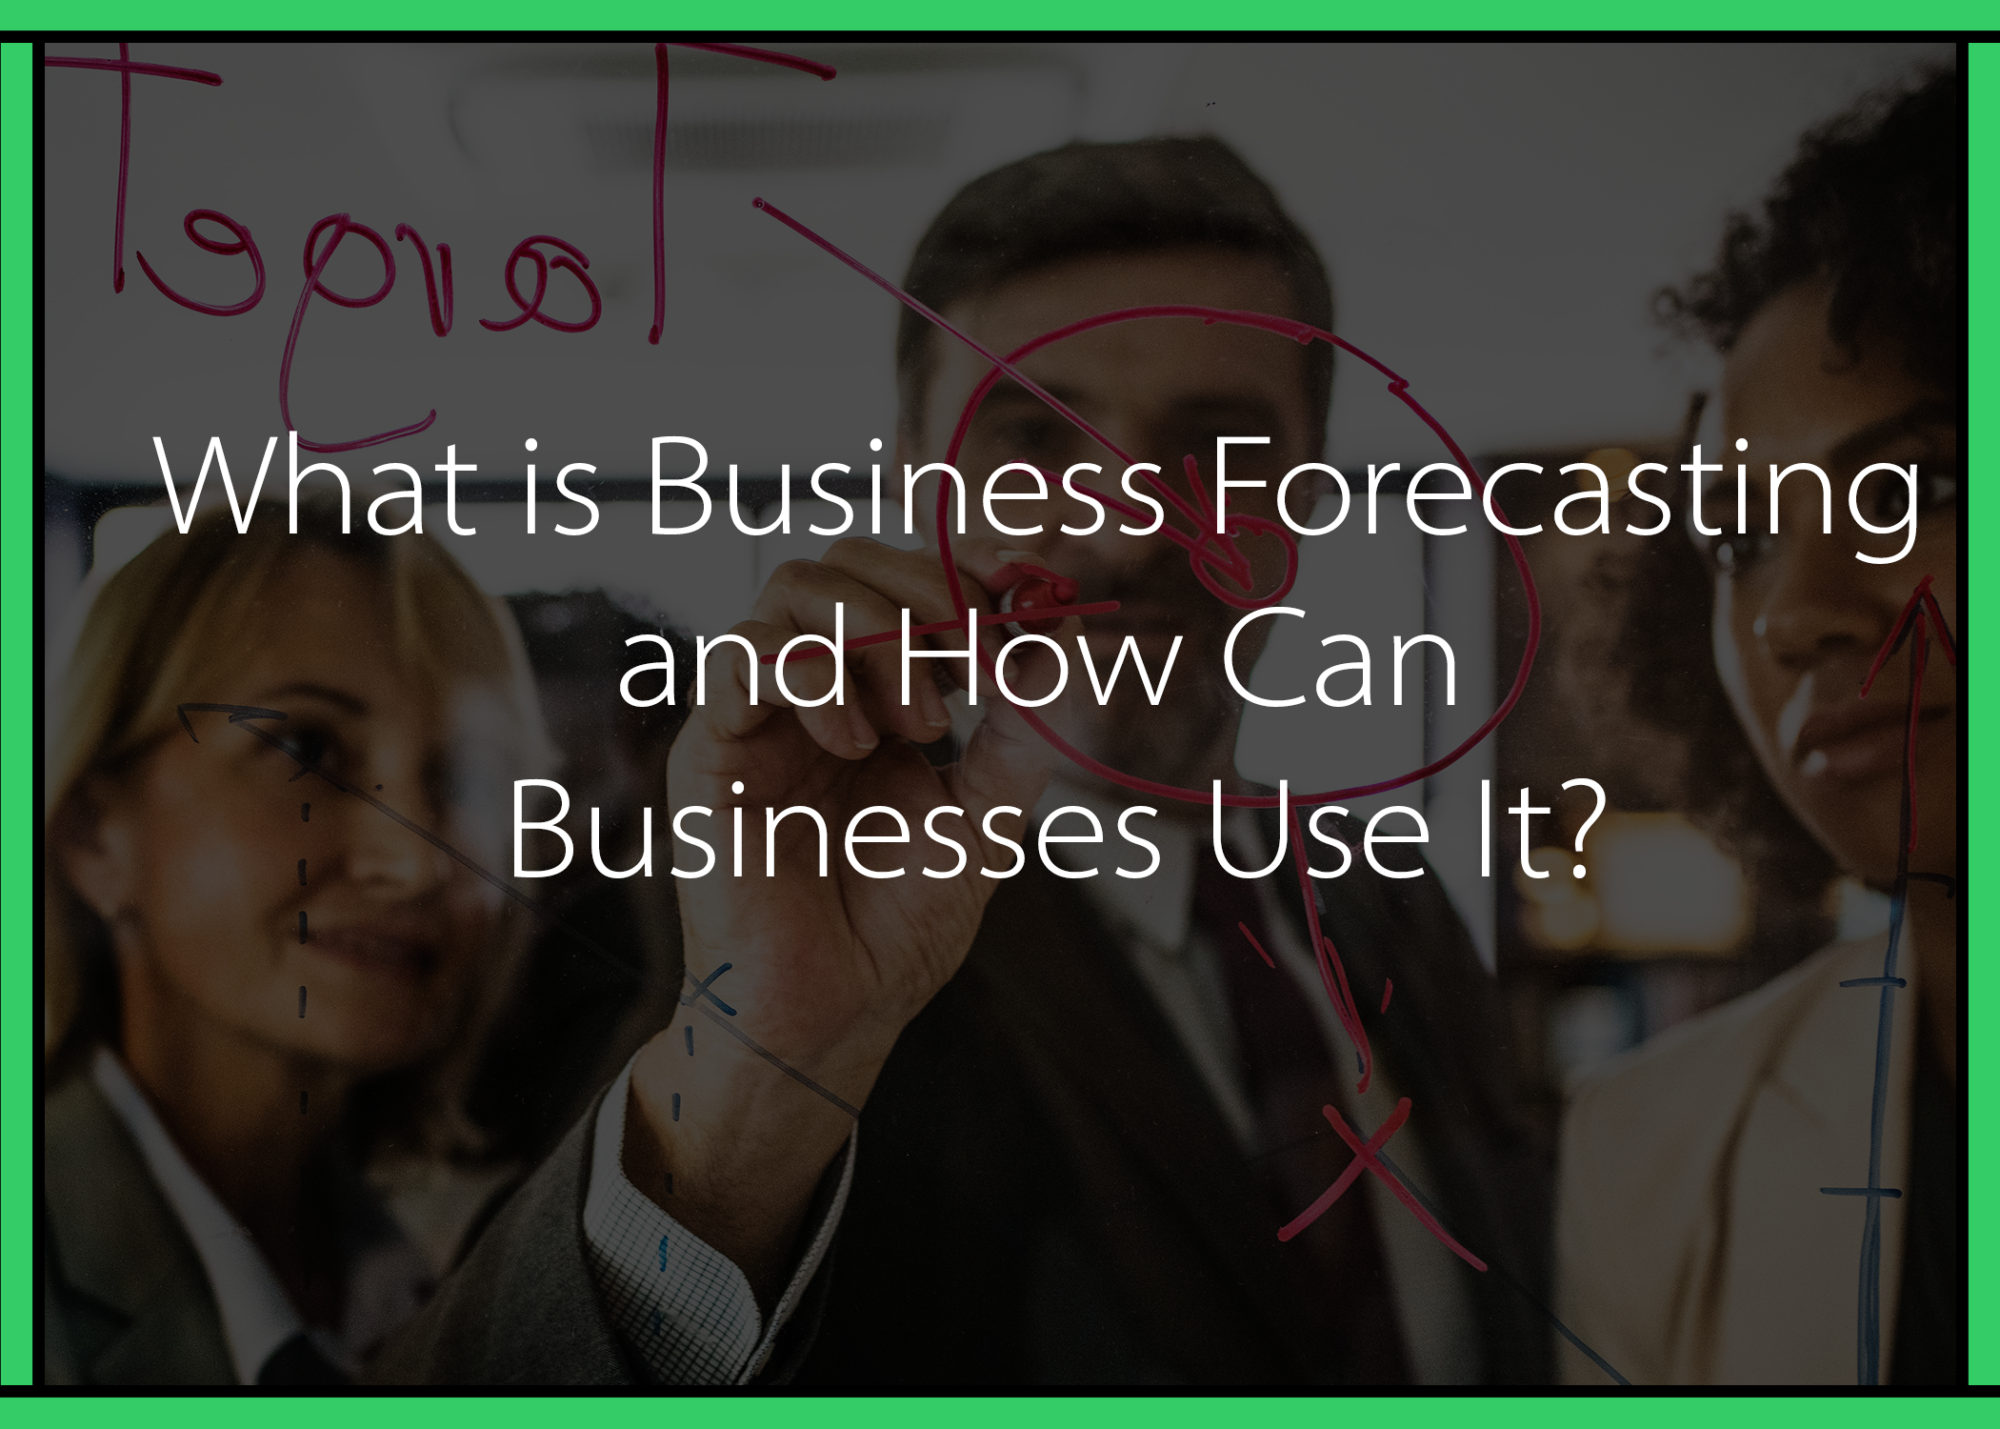 What is Business Forecasting and How Can Businesses Use It?